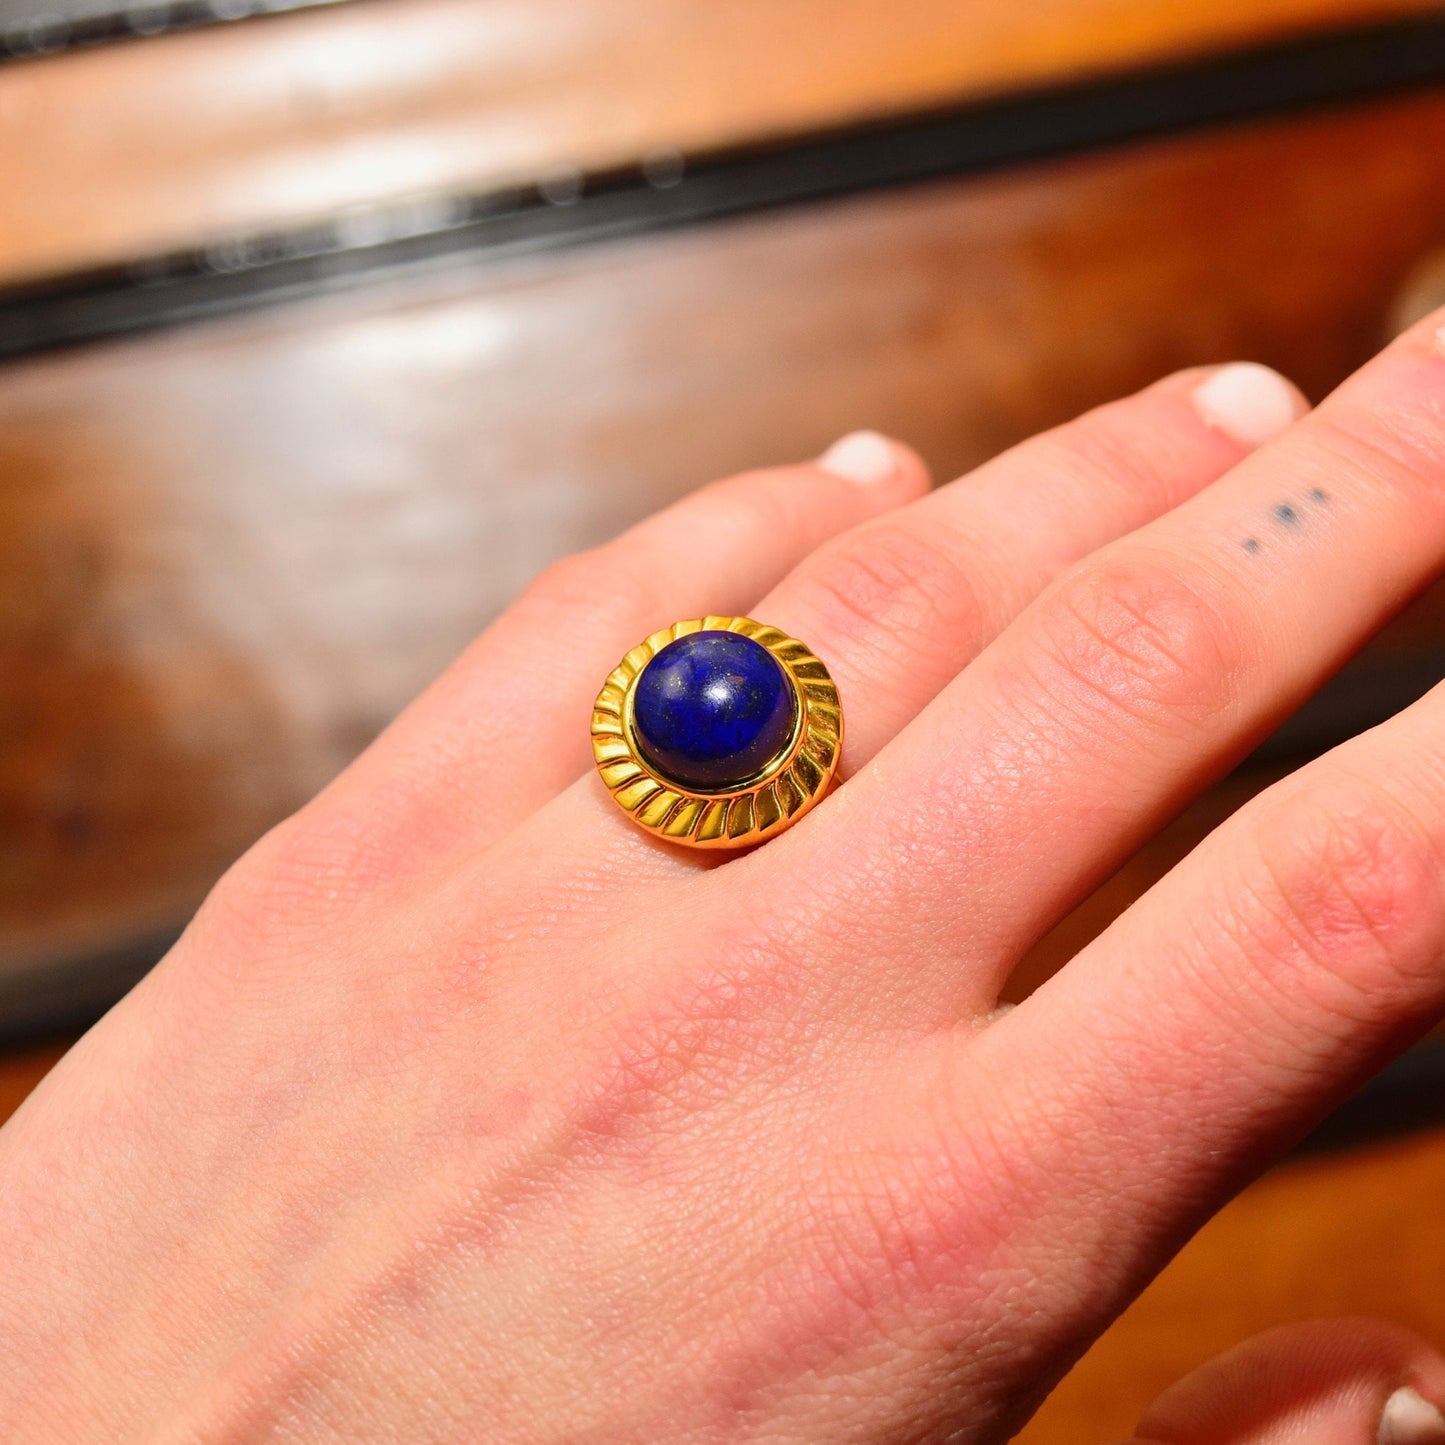 14K yellow gold cabochon lapis lazuli cocktail ring on a hand, with a round deep blue lapis lazuli gemstone set in a textured gold bezel setting, worn on the ring finger, size 7 1/2 US.